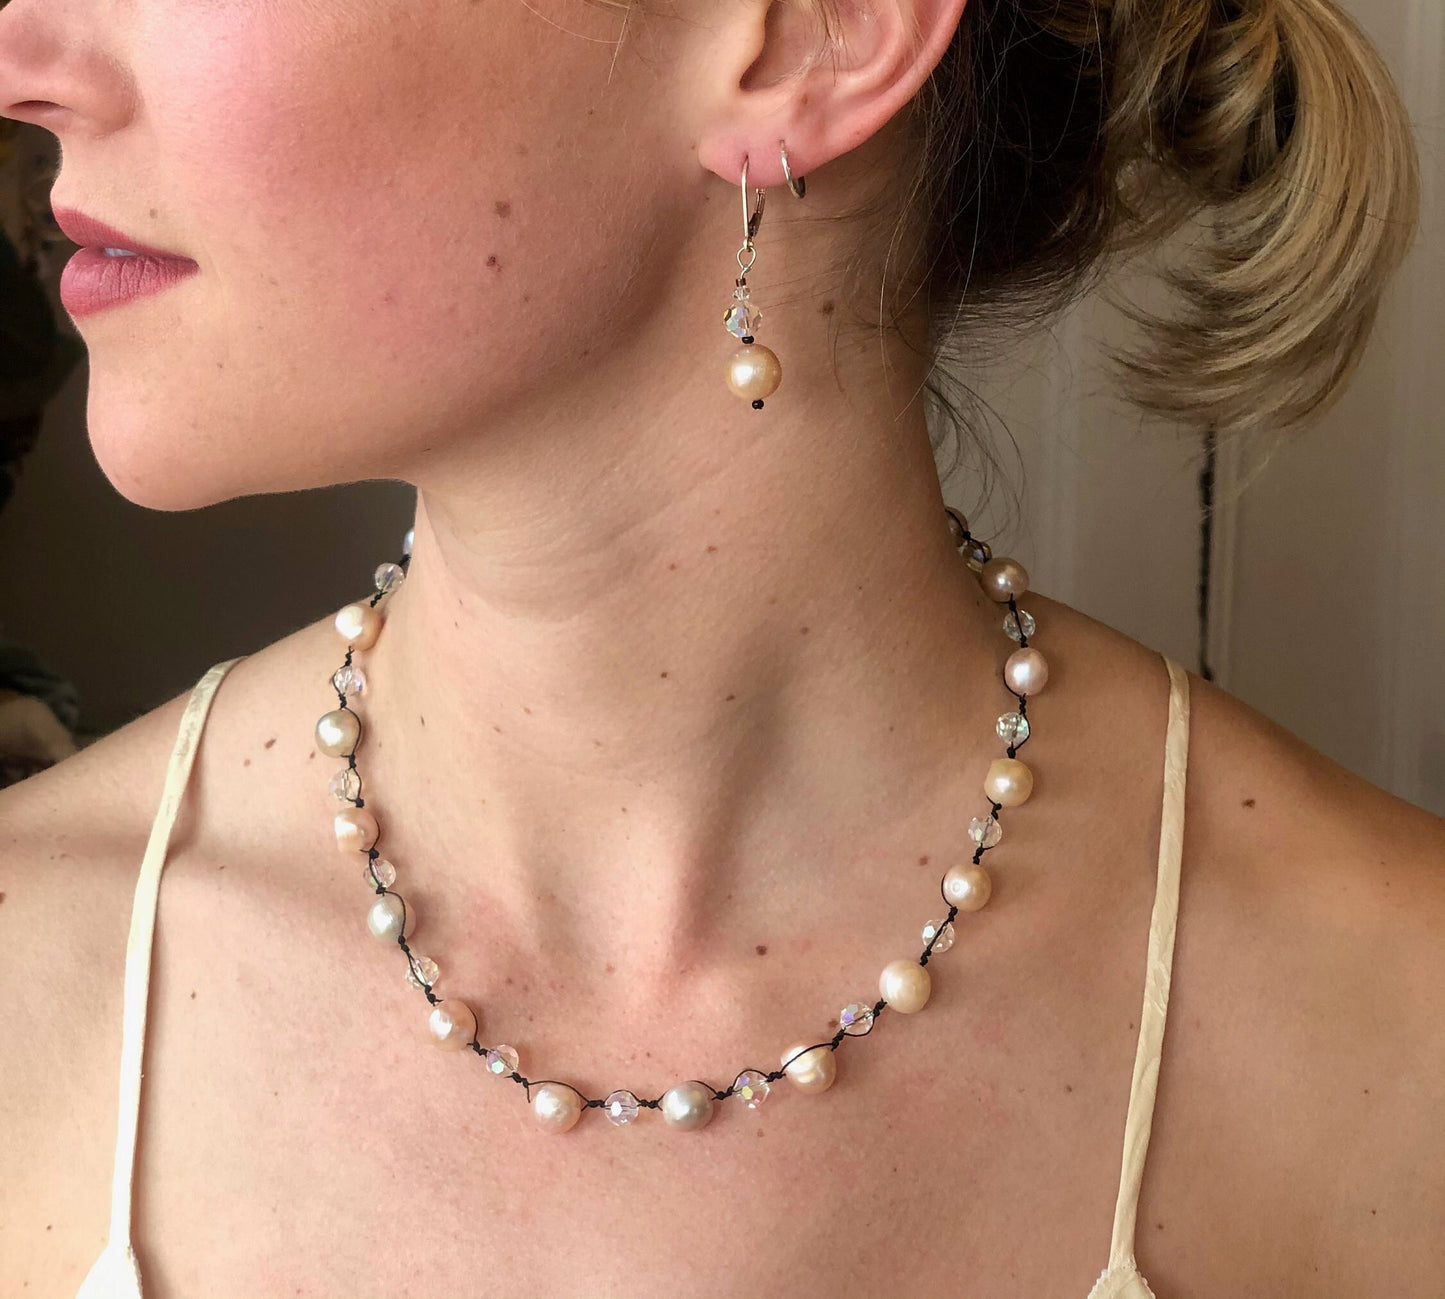 Pearls. Beautiful knotted pale pink fresh water pearl necklace. The necklace is knotted with black silk thread and accented with crystal beads.